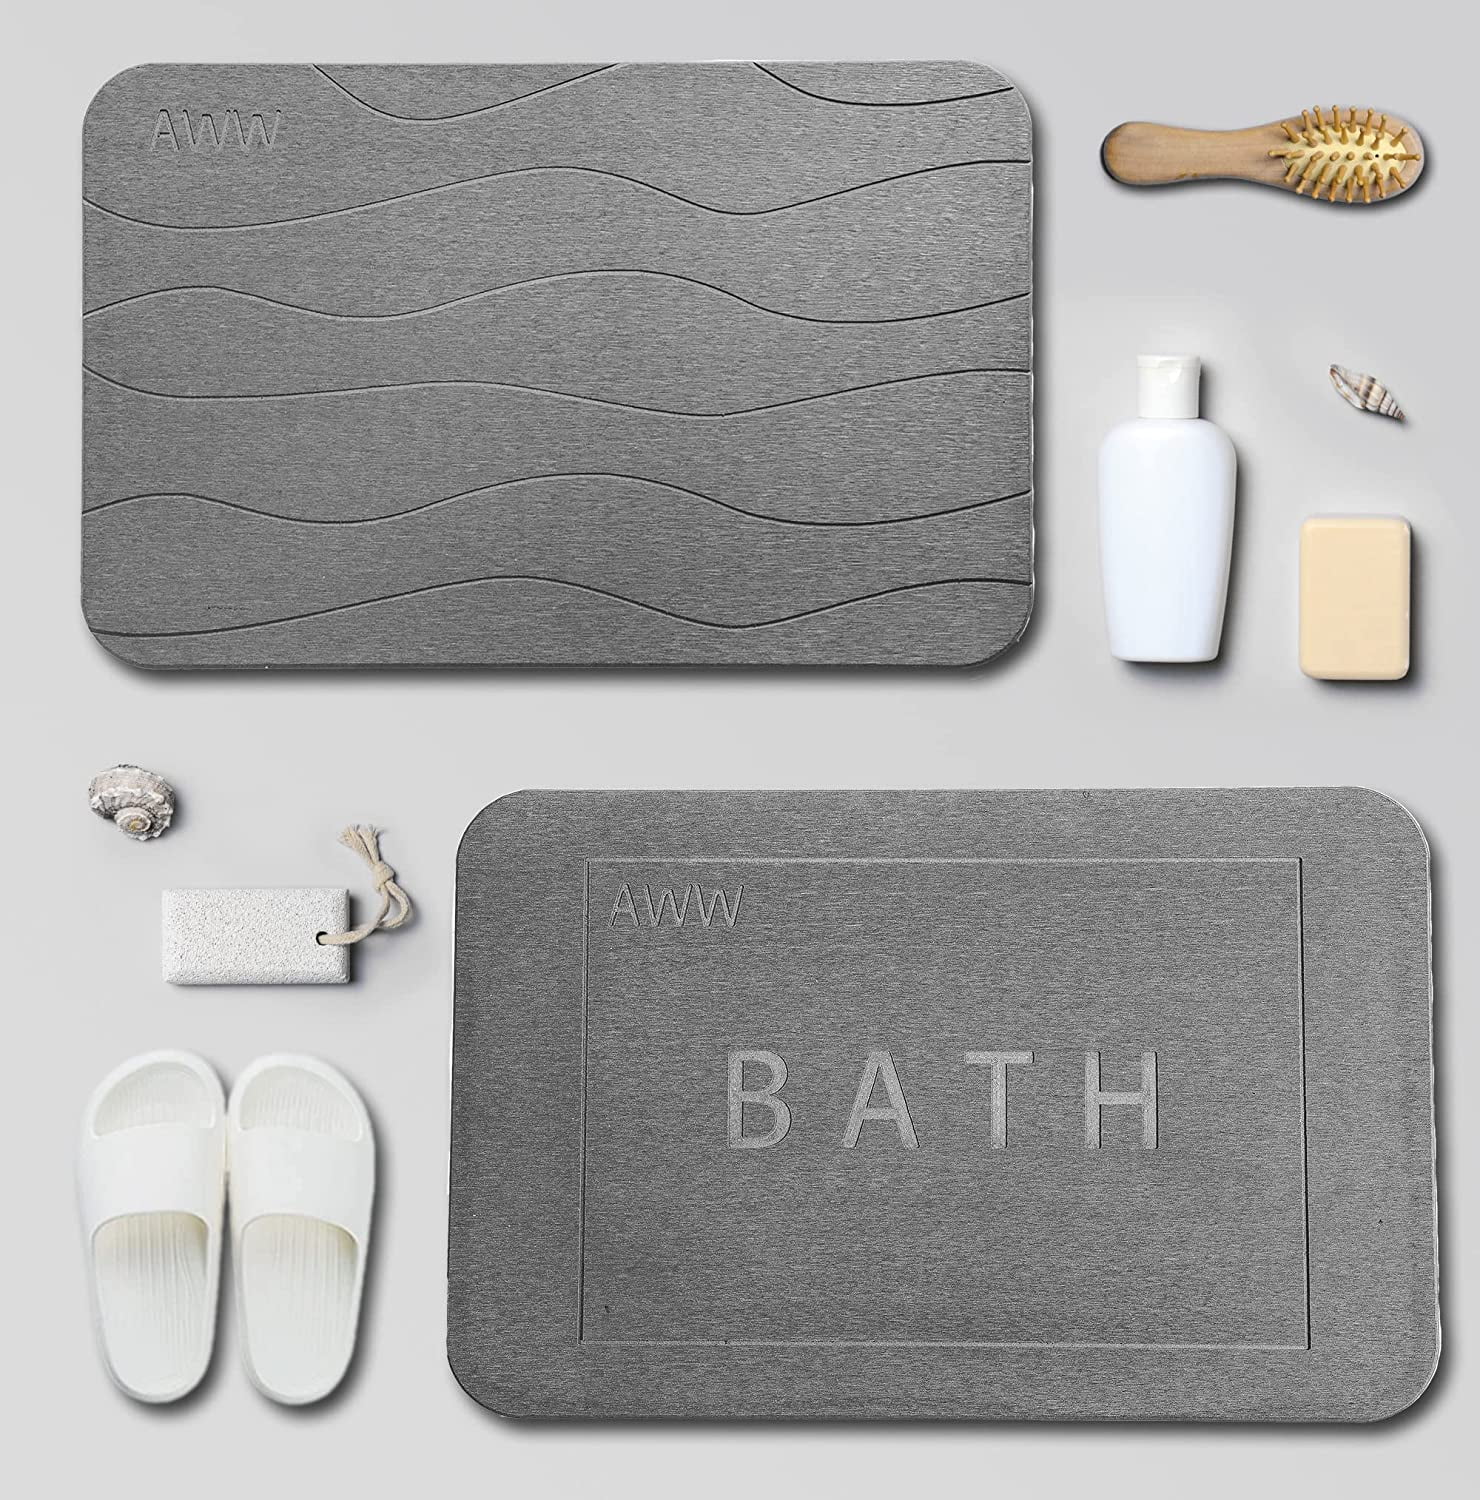  Viycuho Stone Bath Mat, Diatomaceous Earth Shower Mat,Kitchen  mats， Non-Slip Super Absorbent Quick Drying Bathroom Floor Mat, Natural,  Easy to Clean (24 * 16in, Grey) : Home & Kitchen